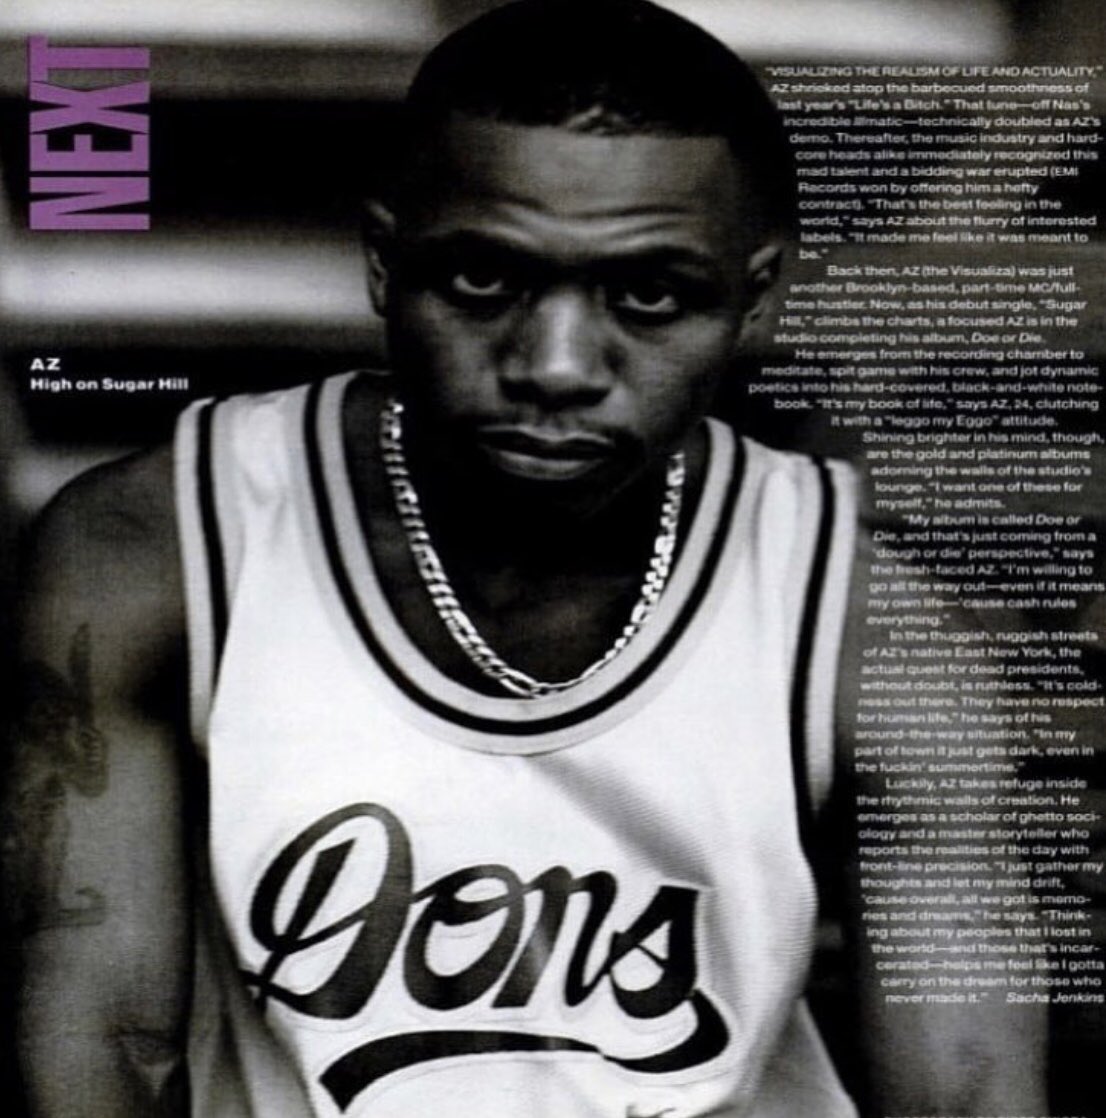 1995. Fresh off his Illmatic appearance, AZ signs a deal with EMI records releasing his debut album, Doe or Die. Widely regarded as a classic, Doe or Die helps usher in the Mafiaso style a year ahead of JayZ’s Reasonable Doubt x Nas’s It Was Written.